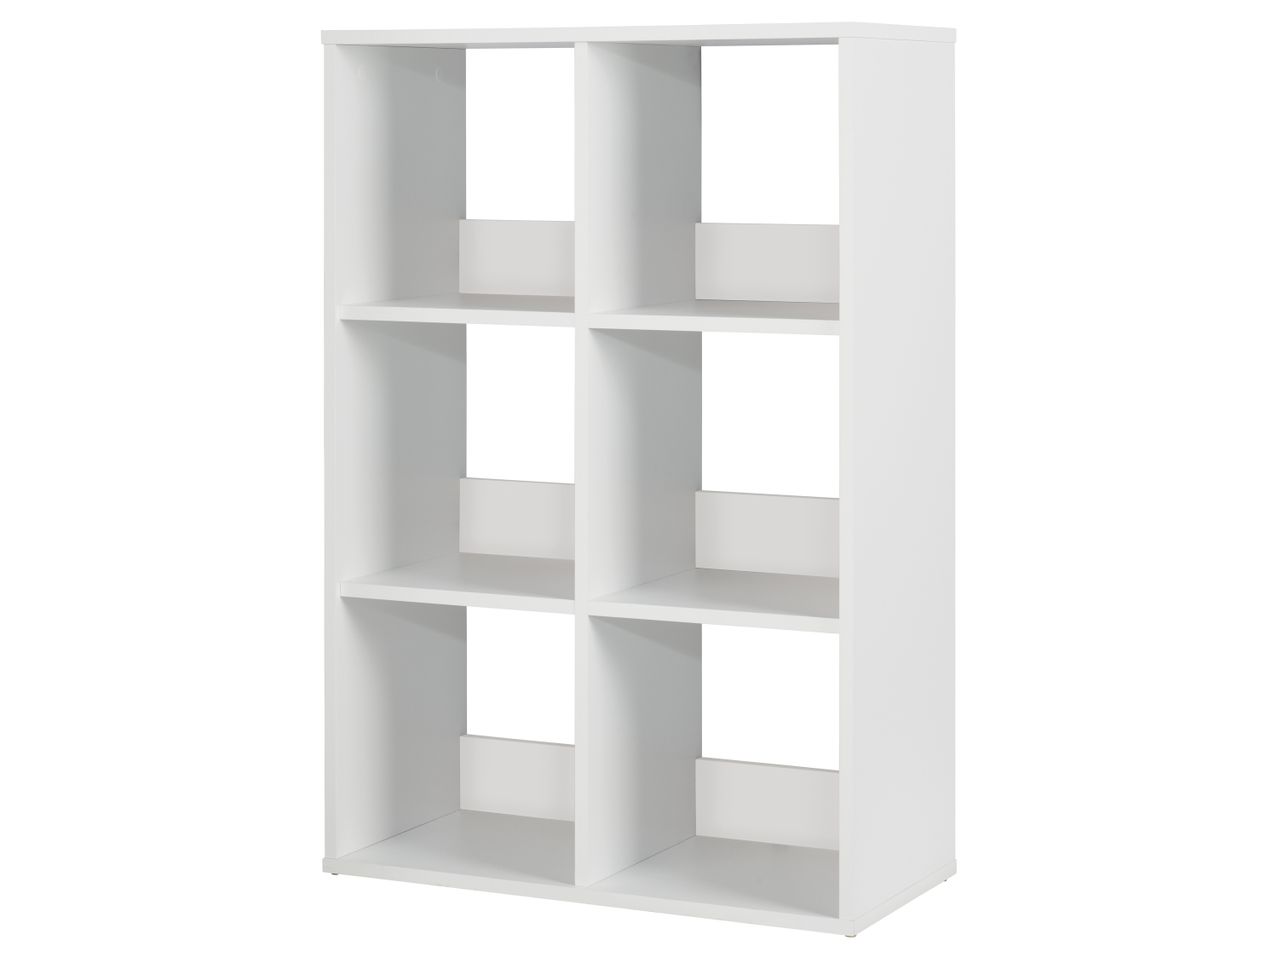 Go to full screen view: Shelving Unit with 6 compartments - Image 2